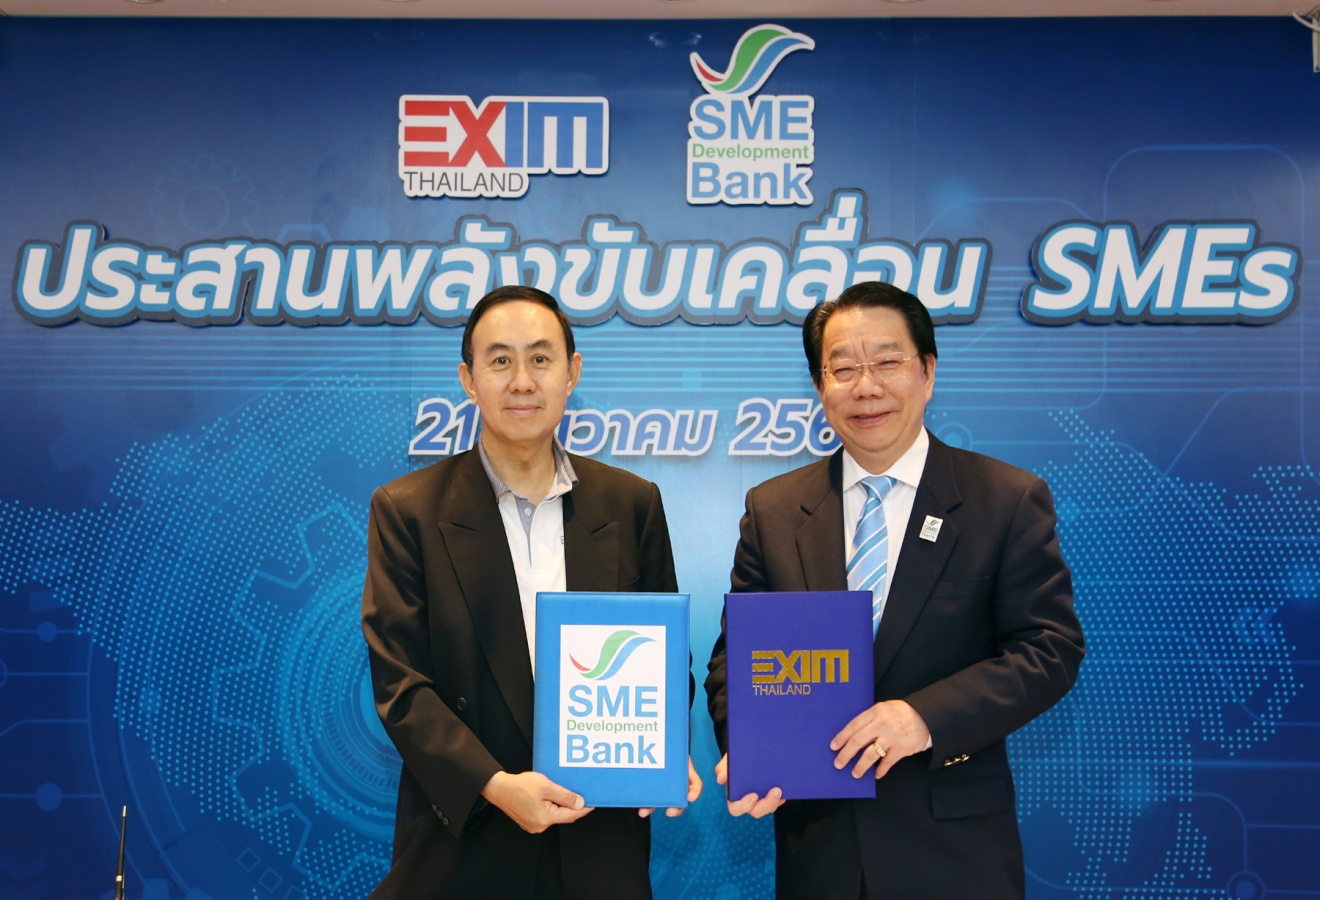 EXIM Thailand and SME Development Bank Join Hands to Drive Thai SME Businesses across the Globe